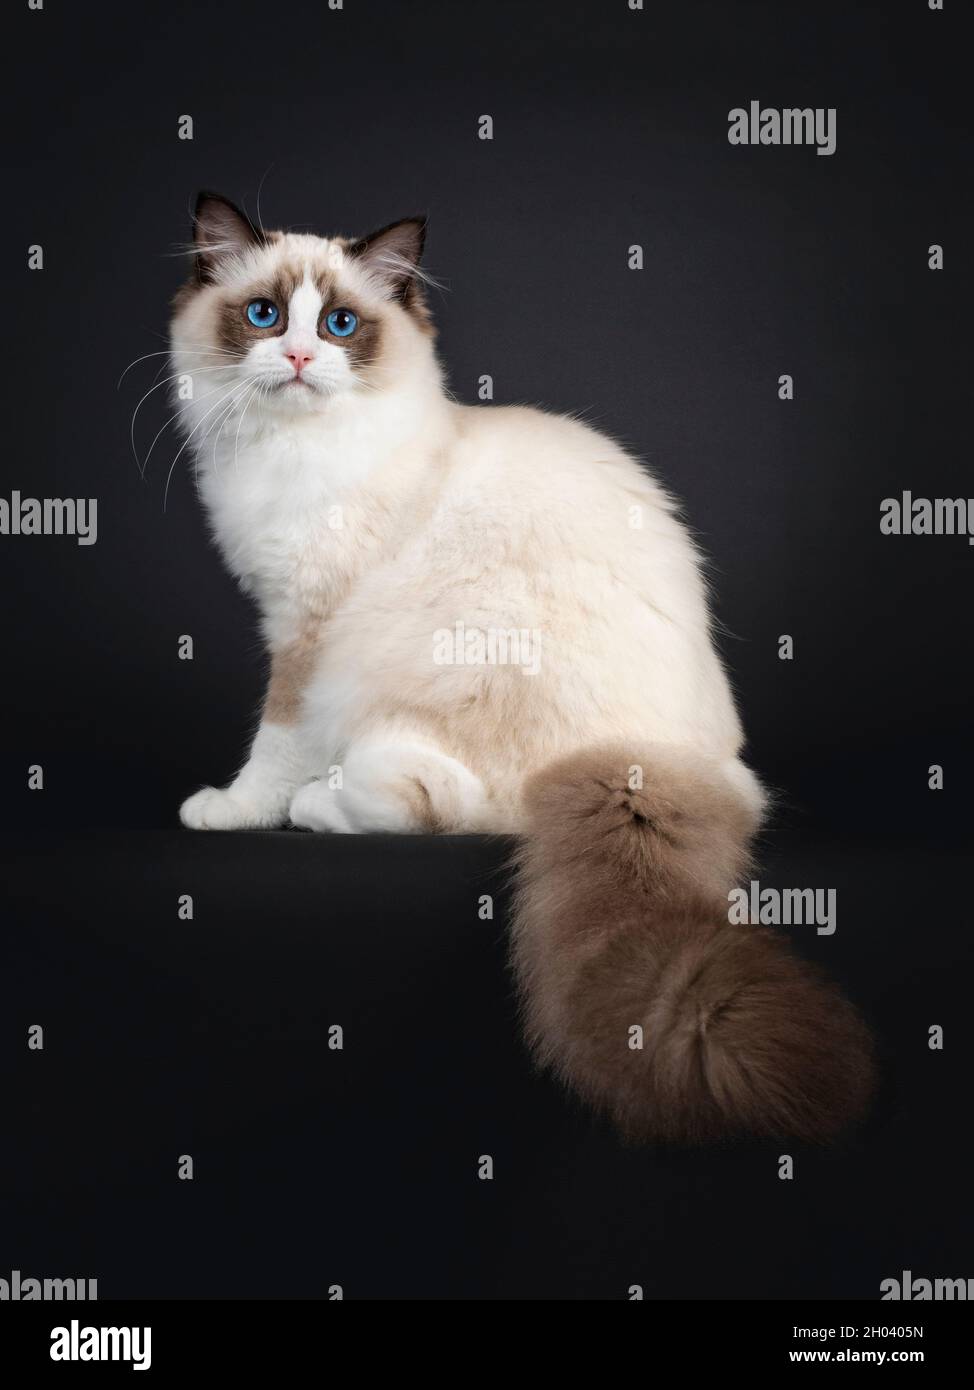 Cute seal bicolor Ragdoll cat kitten, sitting side ways on edge with tail hanging down. Looking to lens with mesmerizing blue eyes. Isolated on a blac Stock Photo